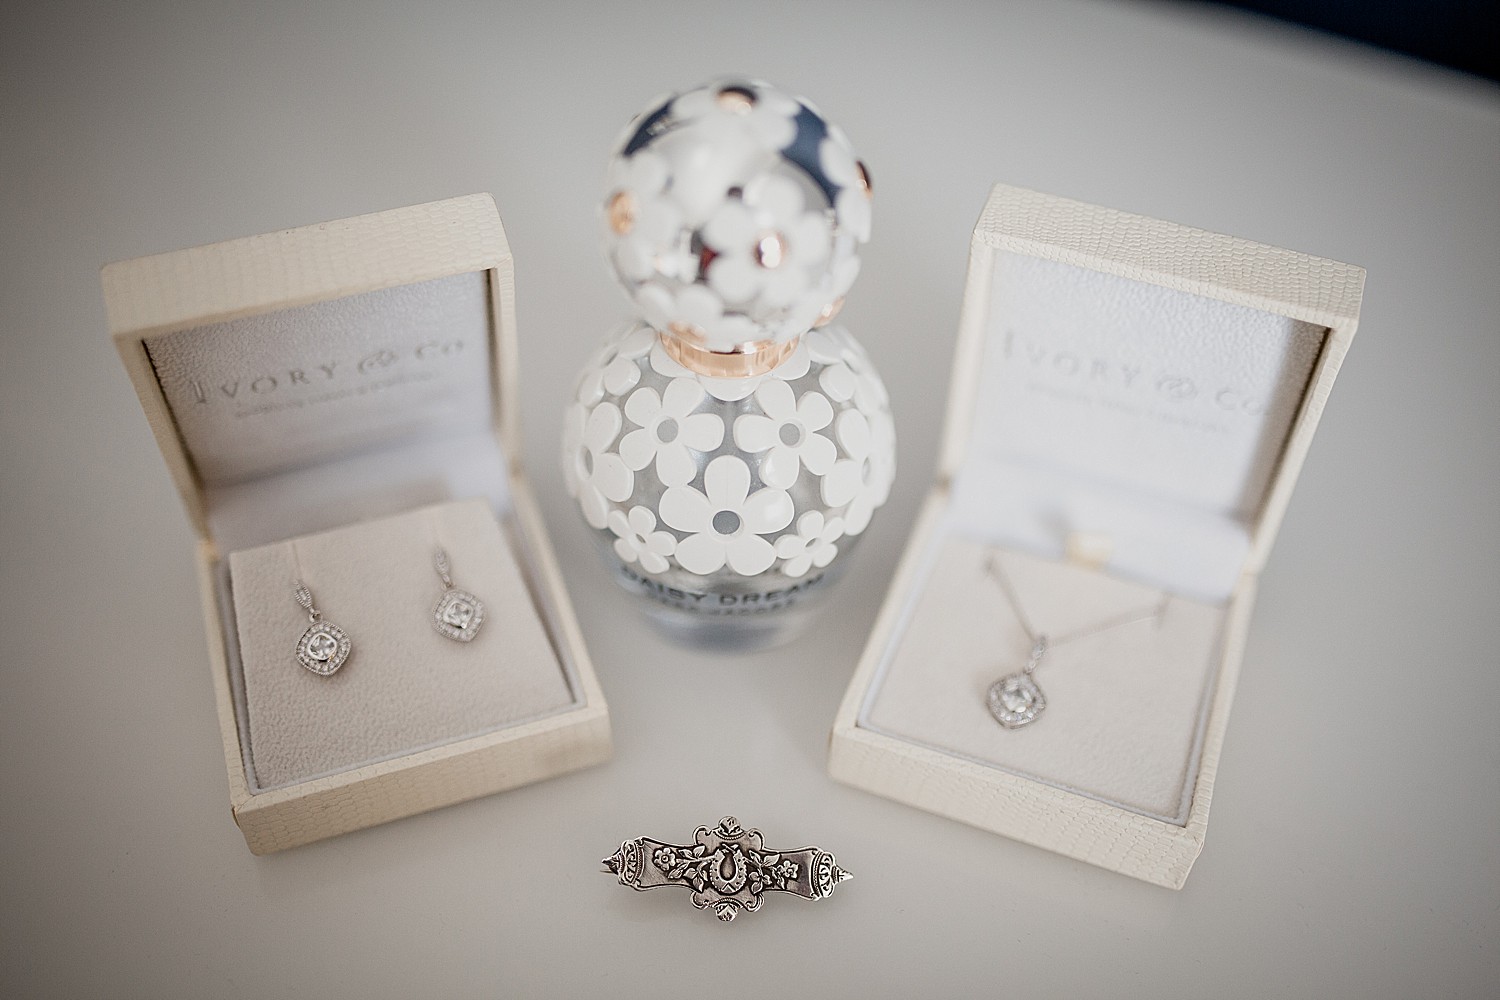 Jewellry, perfume and broach for Liverpool wedding